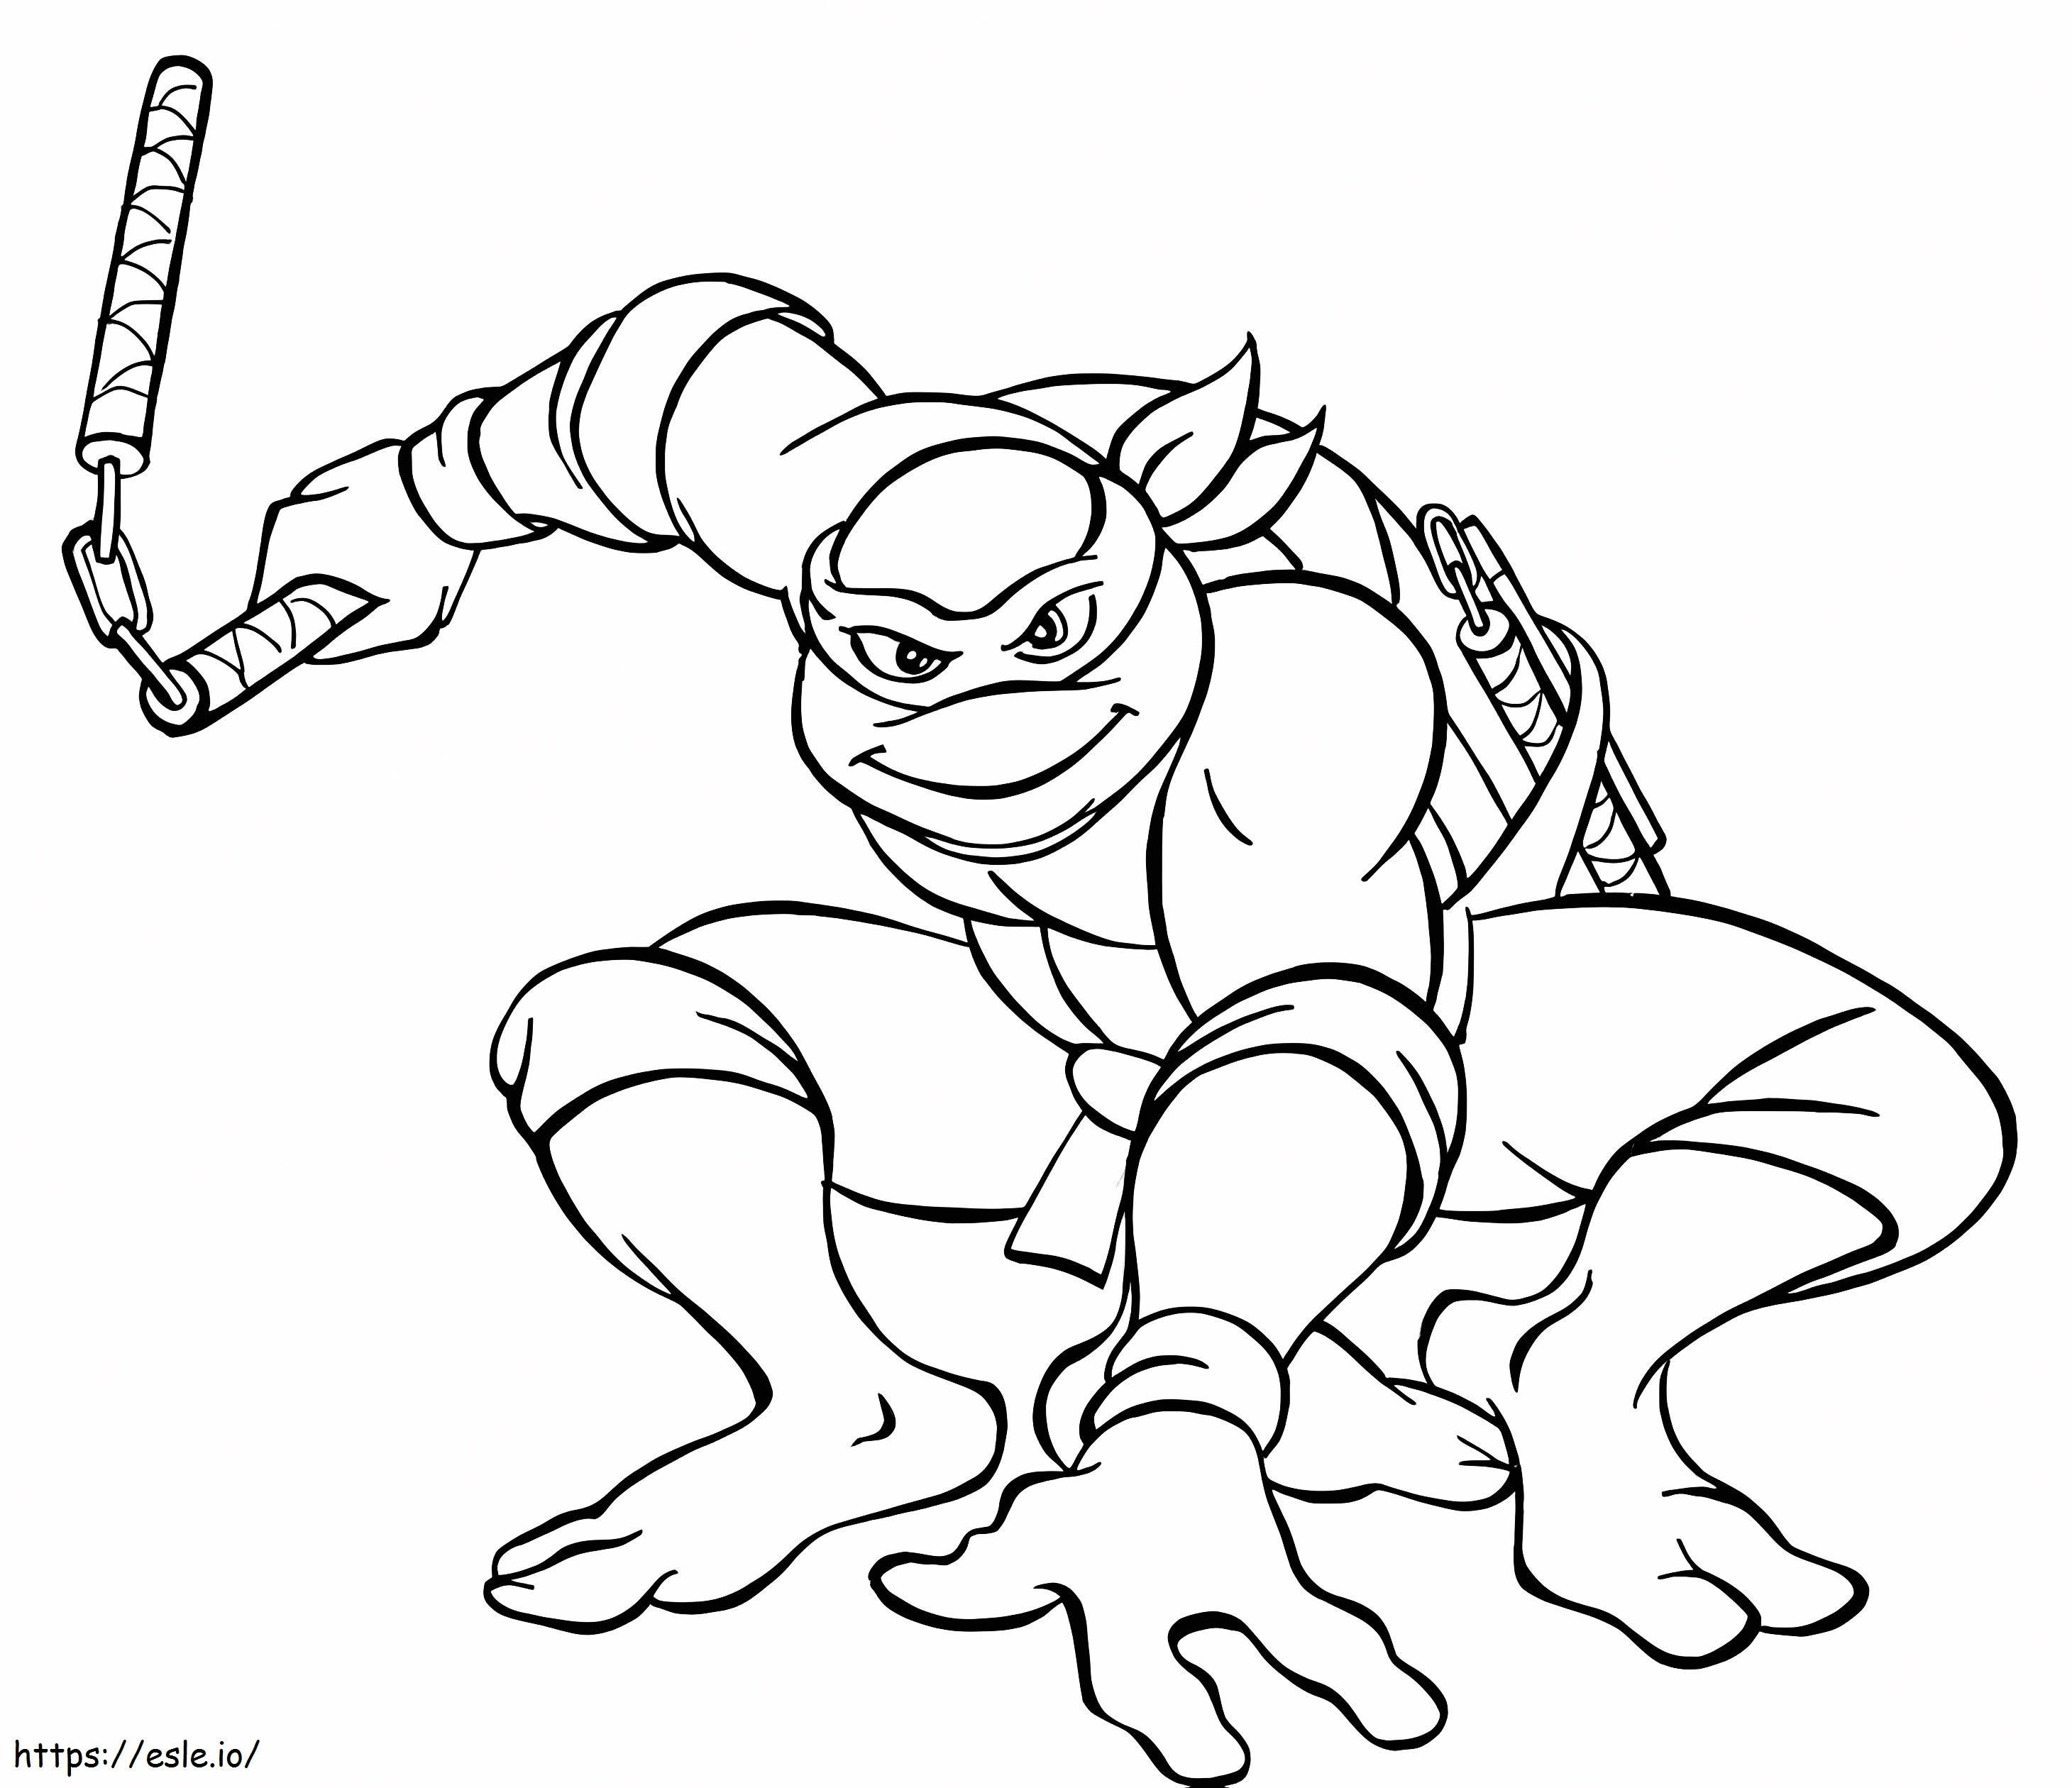 Great Miguel Angel coloring page